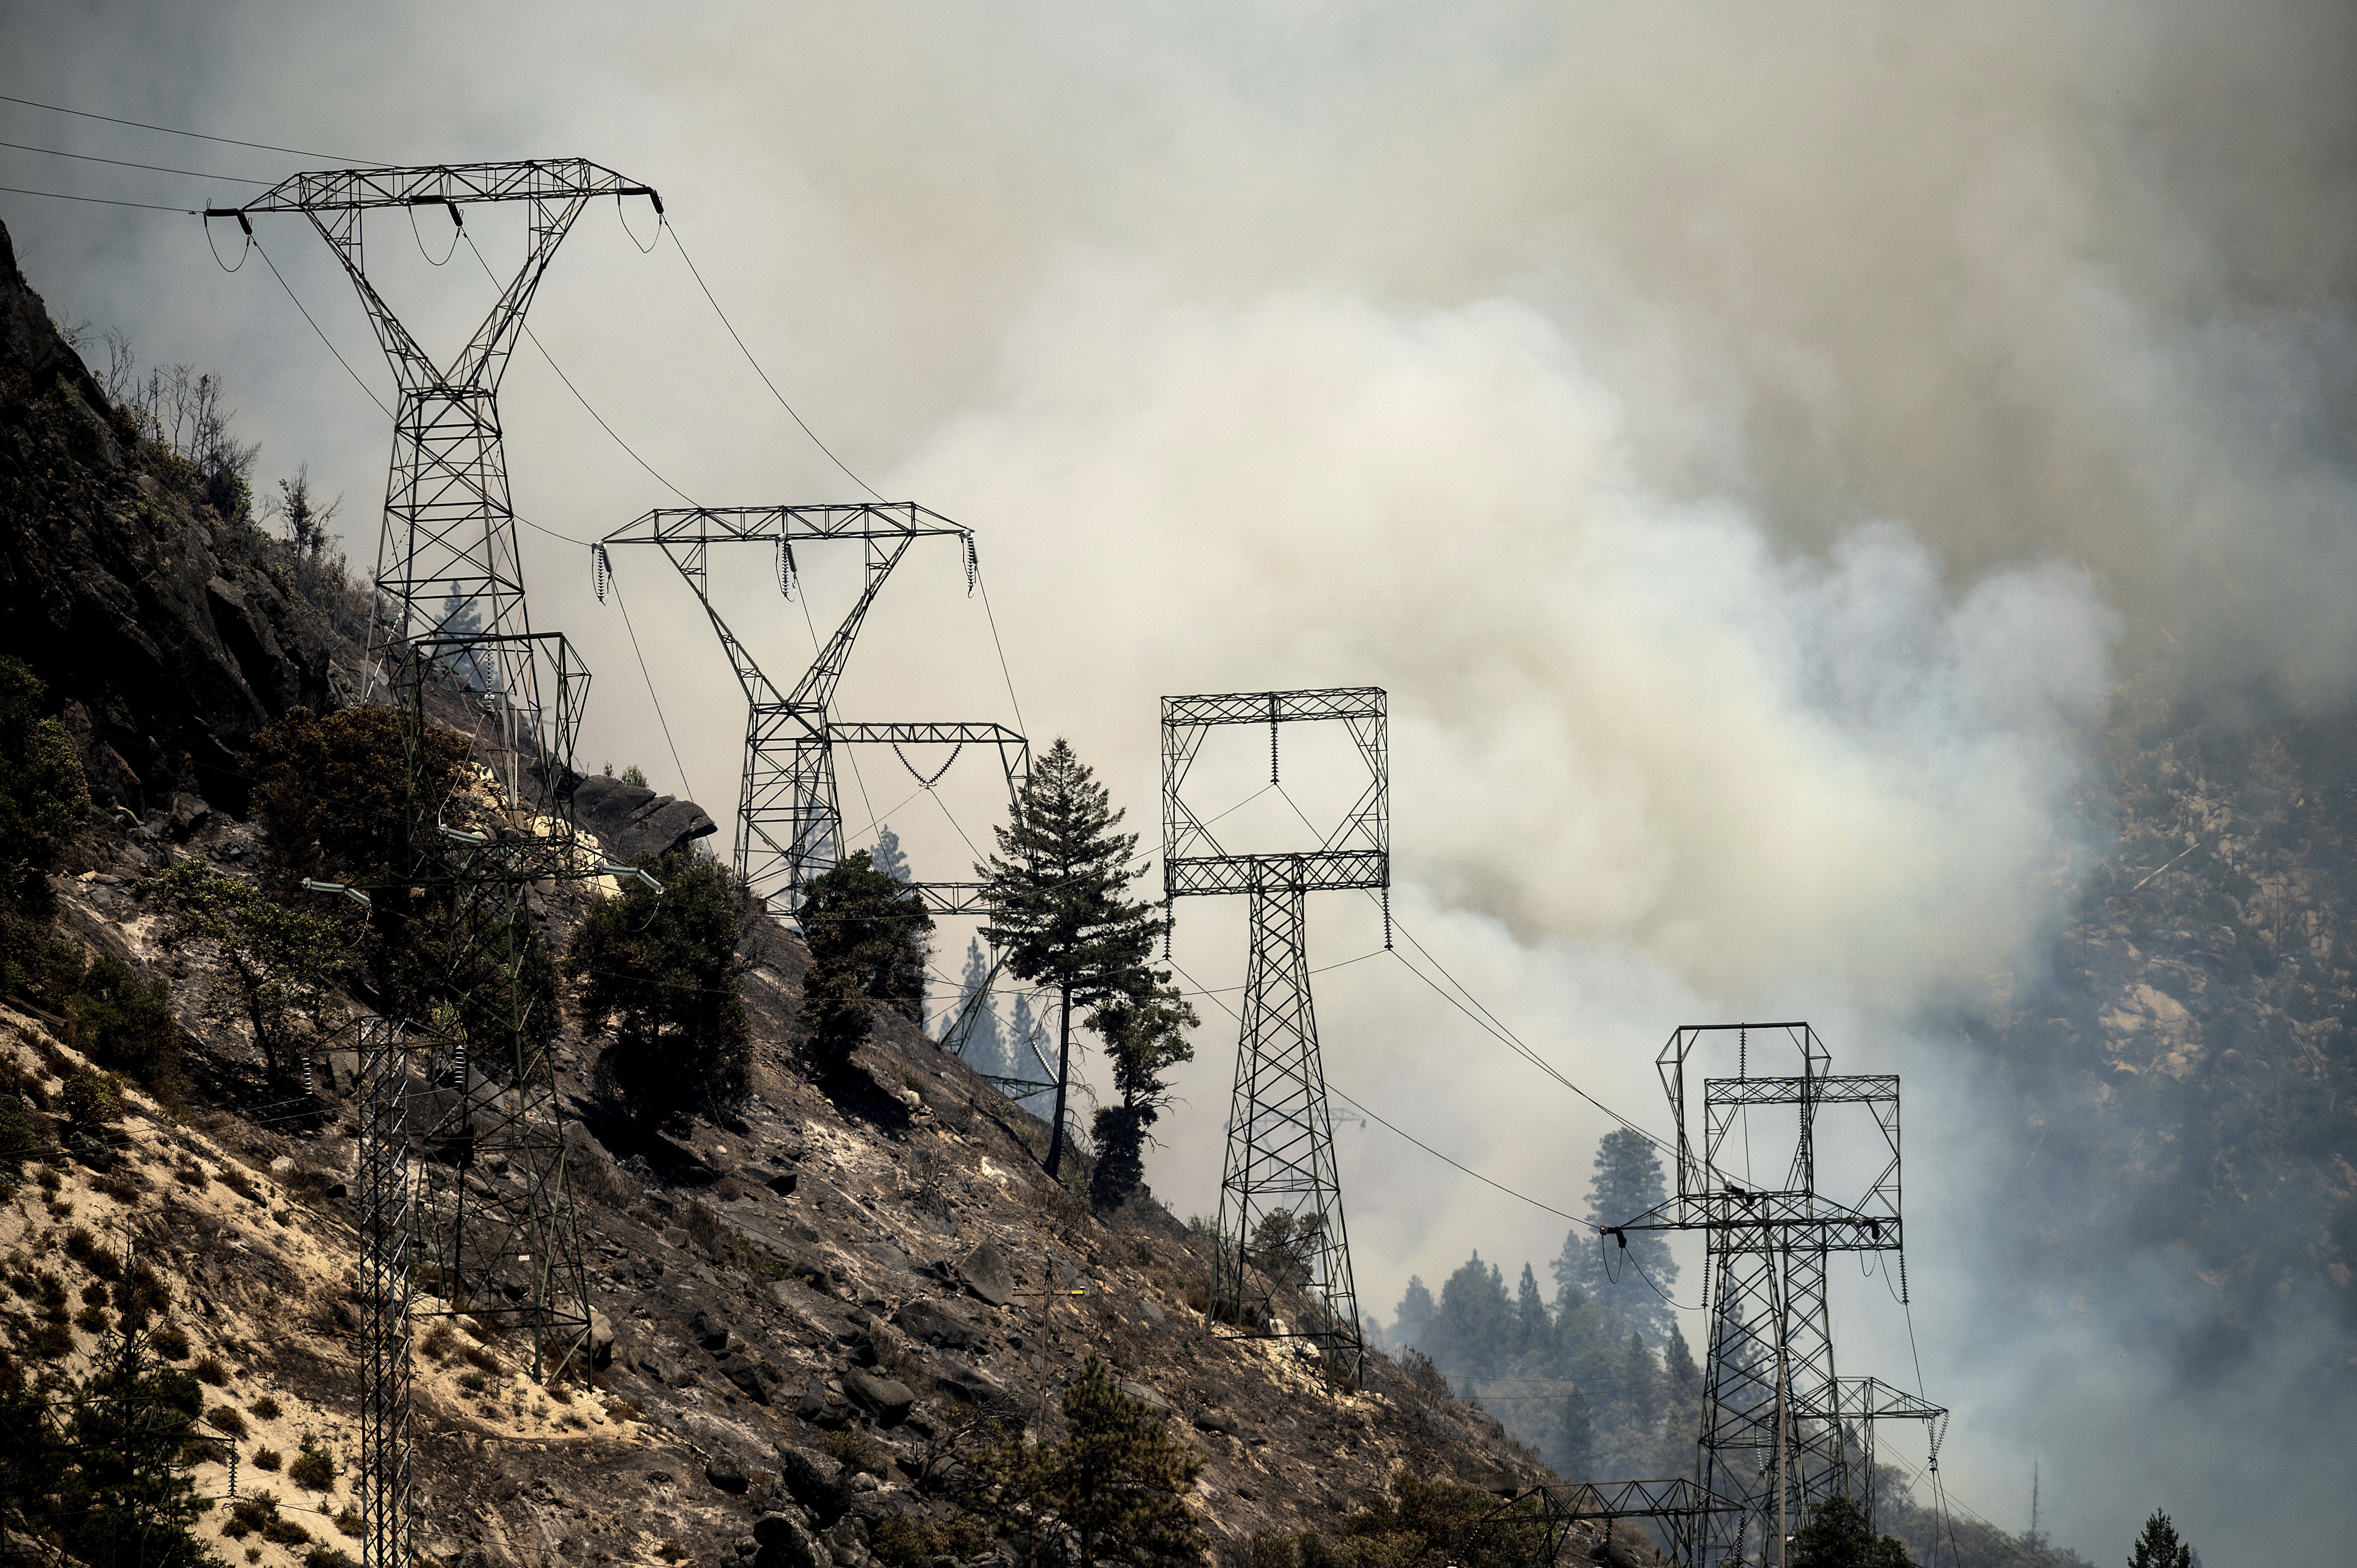 State Auditor Rips Regulators Over Wildfire Safety Plans By PG&E, Major Utilities